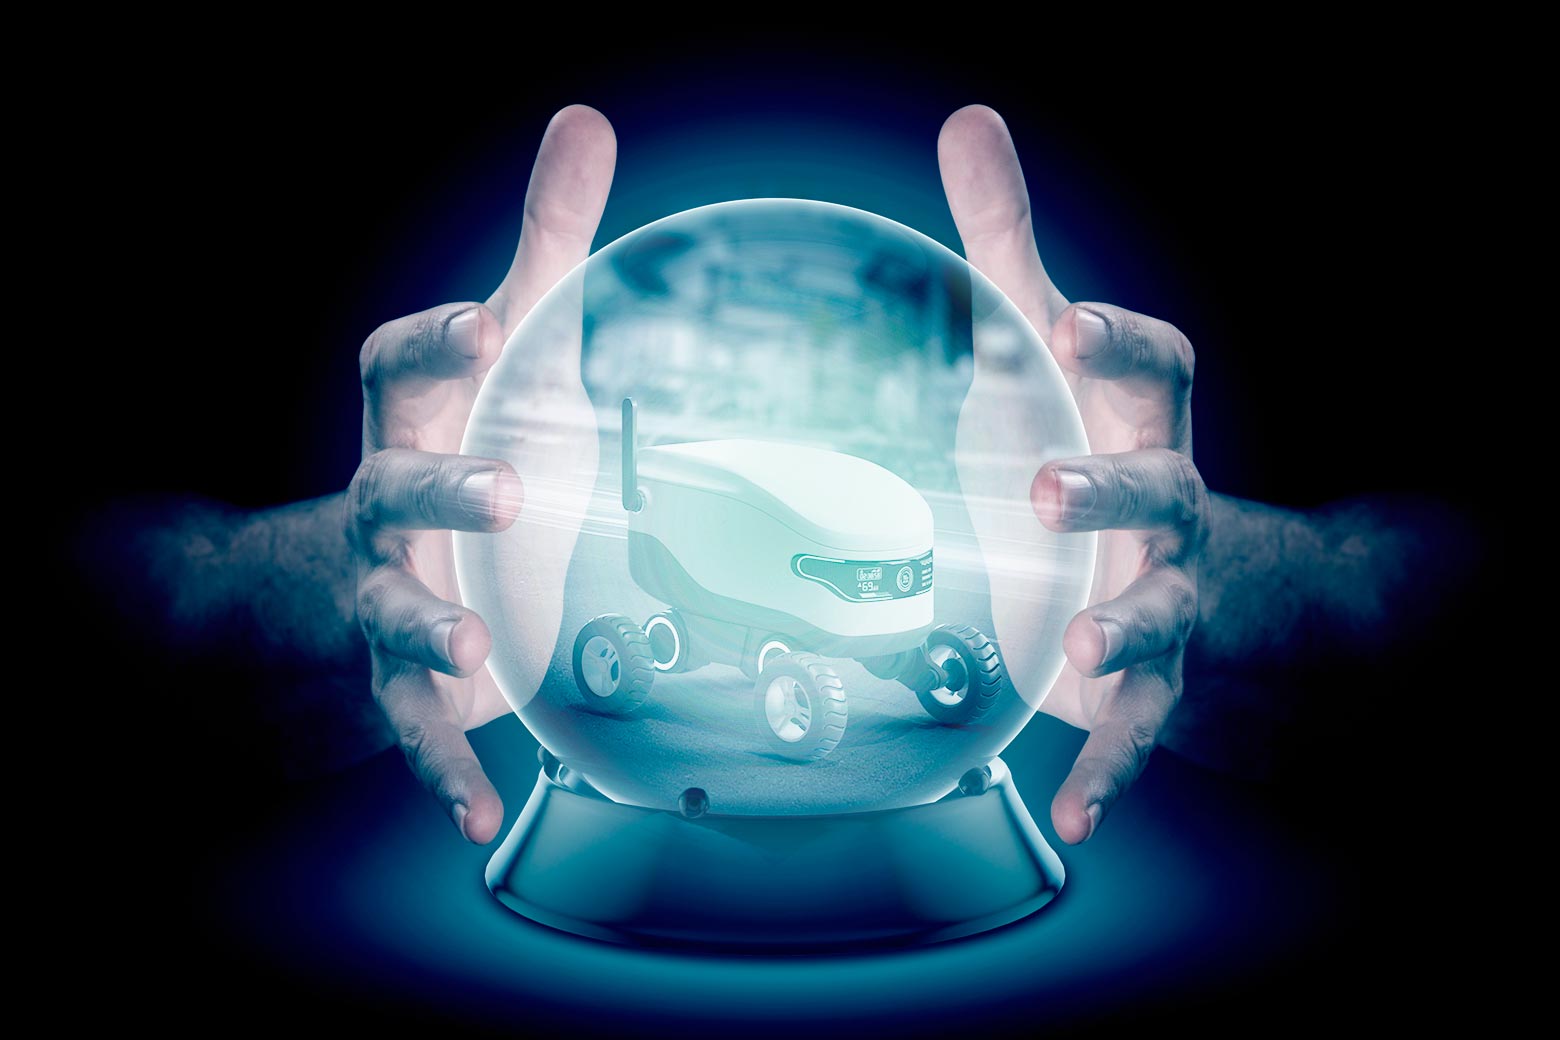 Two hands around a crystal ball with an image of a delivery robot inside it